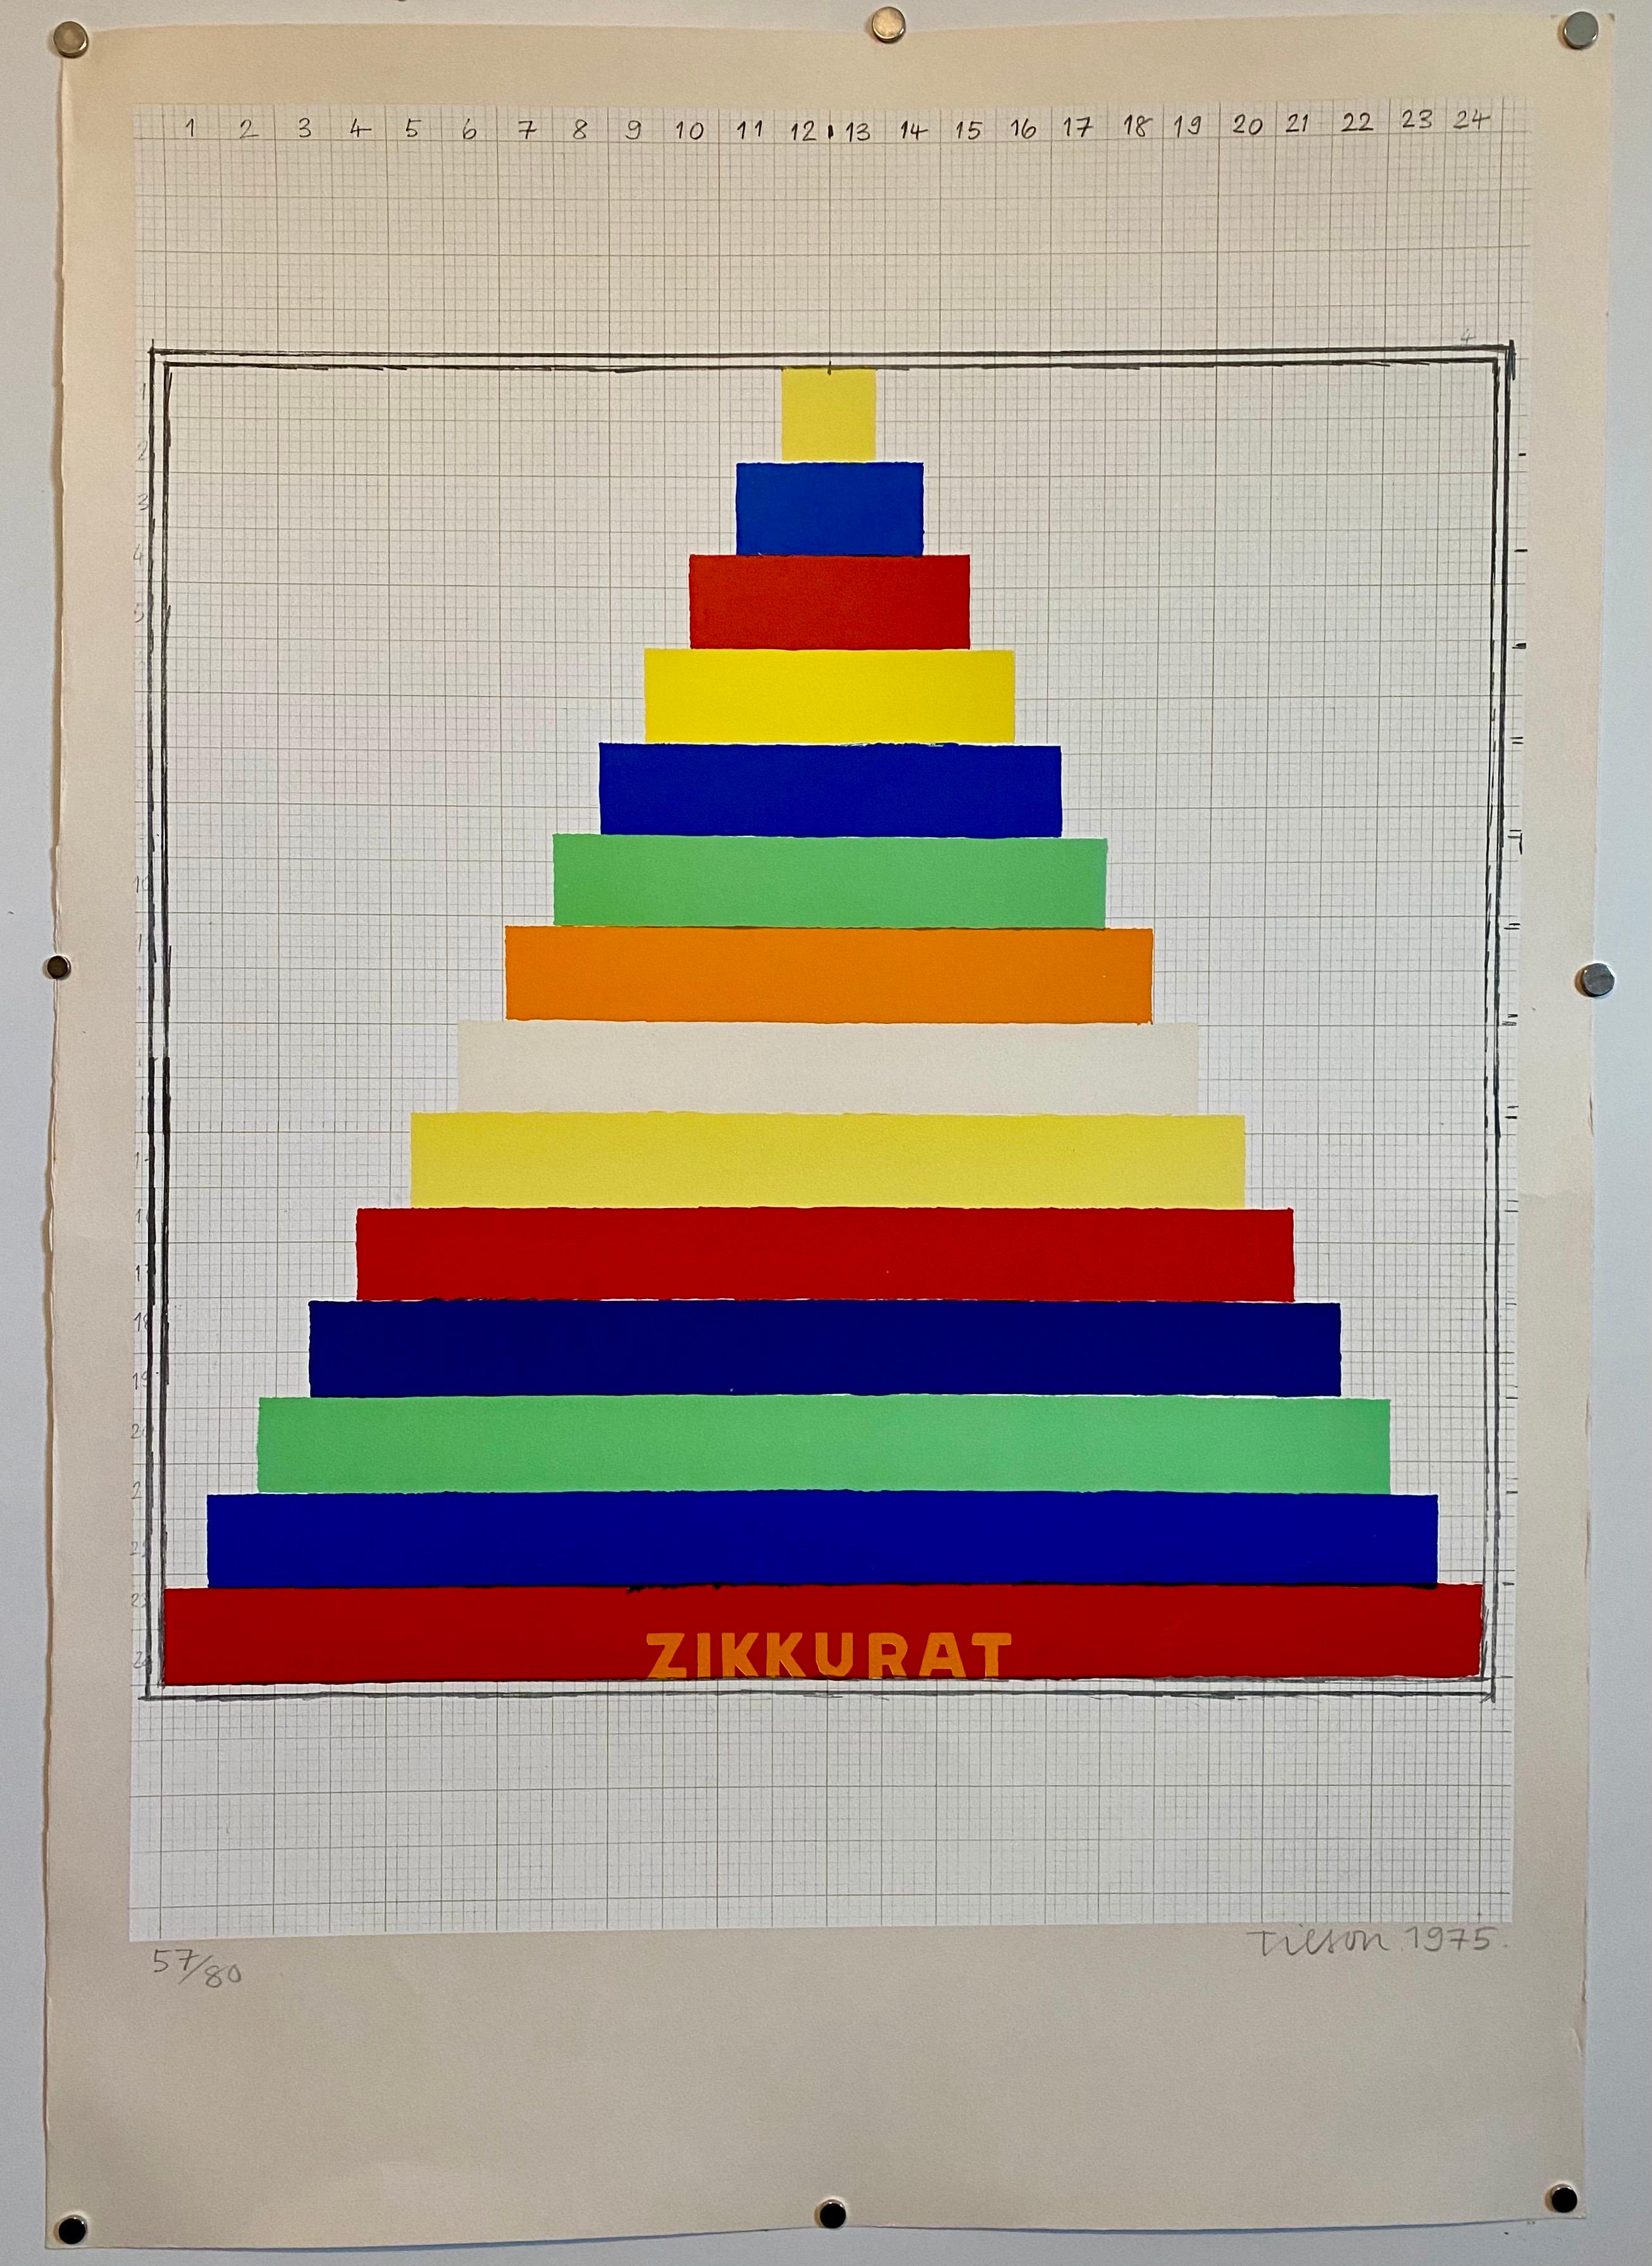 Silkscreen screenprint. Hand signed and numbered. A pyramid or ziggurat in vibrant colors of blue, red, yellow, orange and green on heavy paper 

Joseph Charles Tilson RA (born 24 August 1928 in London) is an English pop art painter, sculptor and